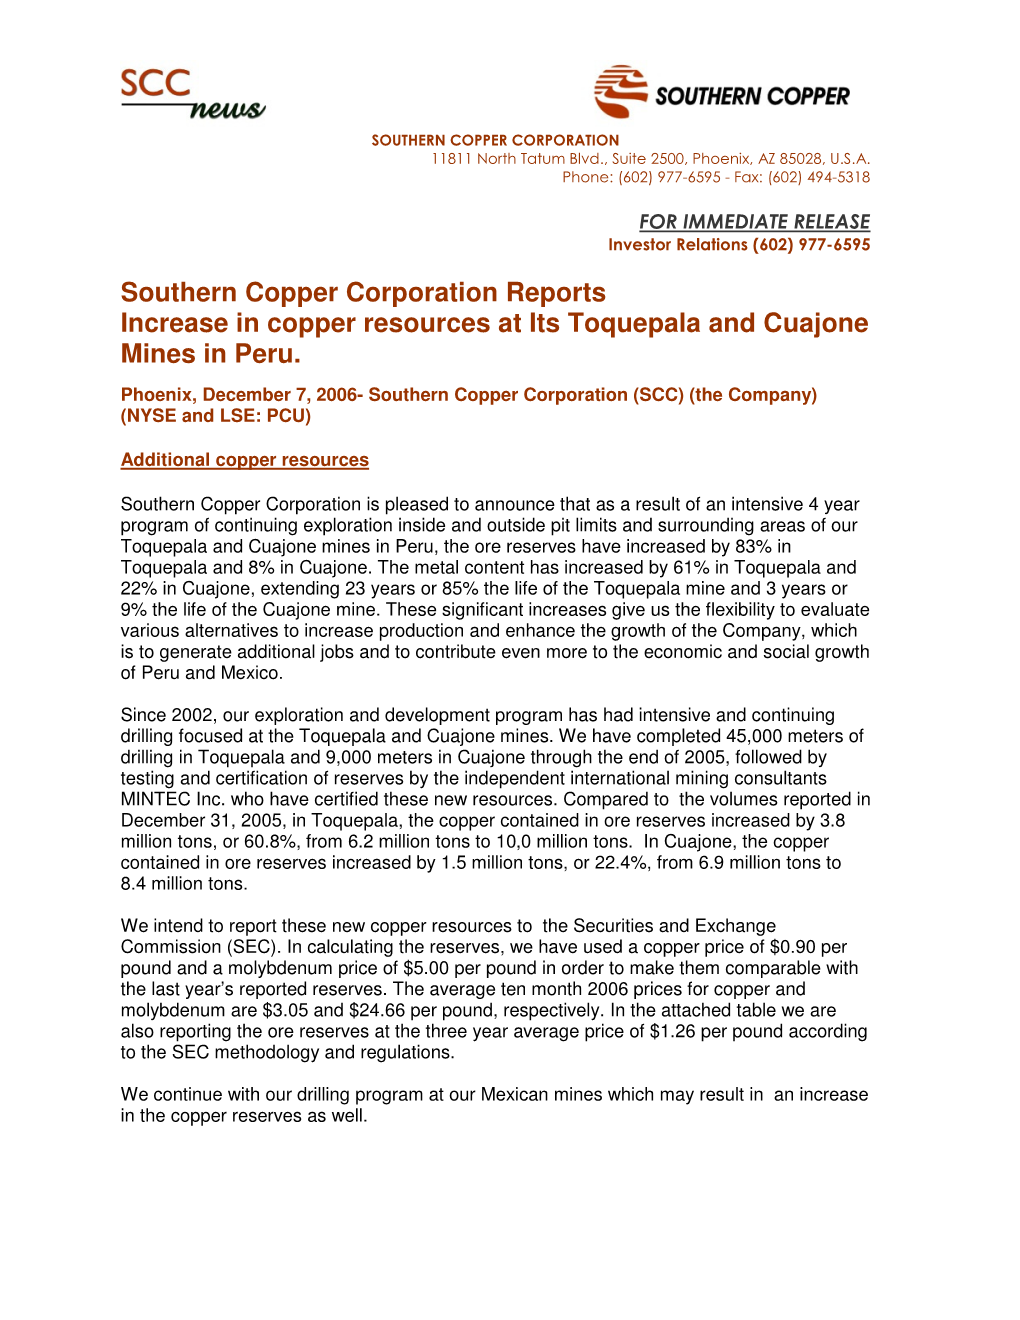 12.07.06 Southern Copper Corporation Reports Increase In